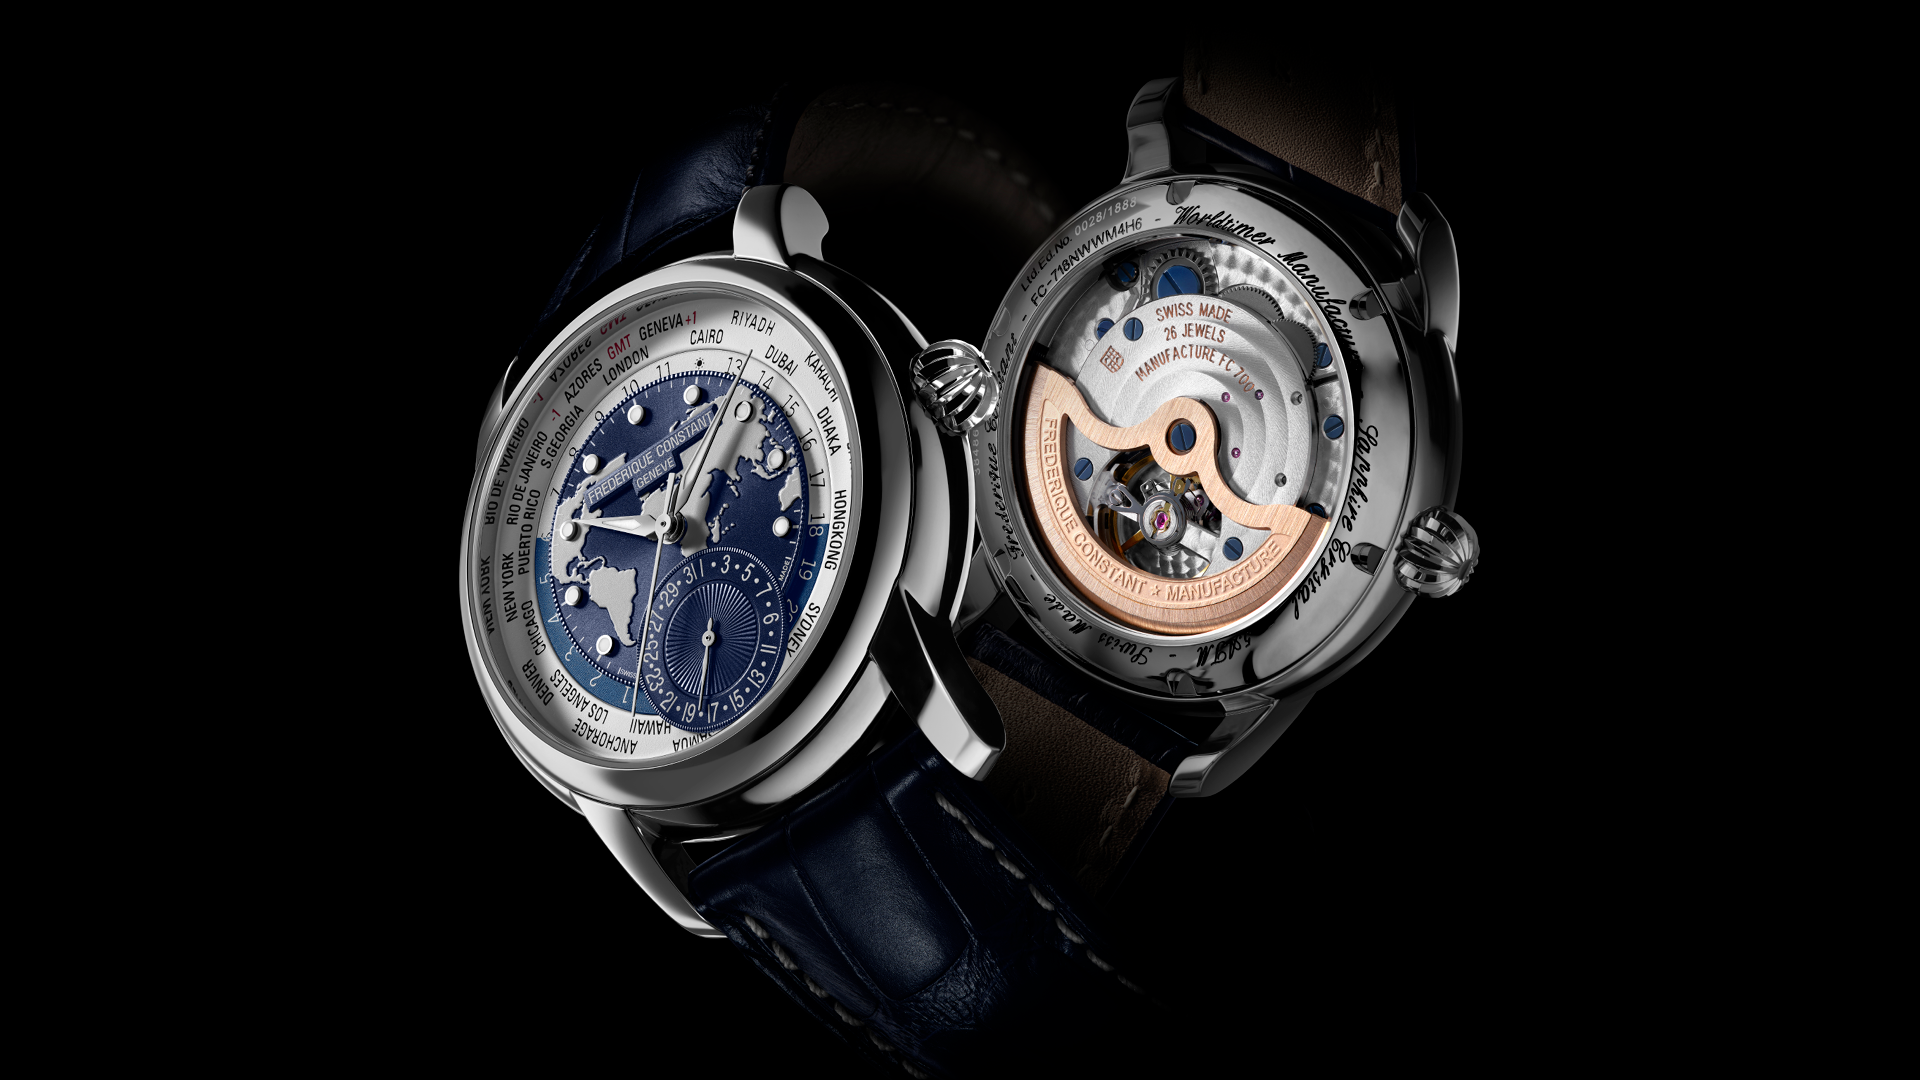 Classicss Worldtimer Manufacture watch for man. Automatic movement, blue dial, stainless-steel case, date counter, worldtimer and blue leather strap